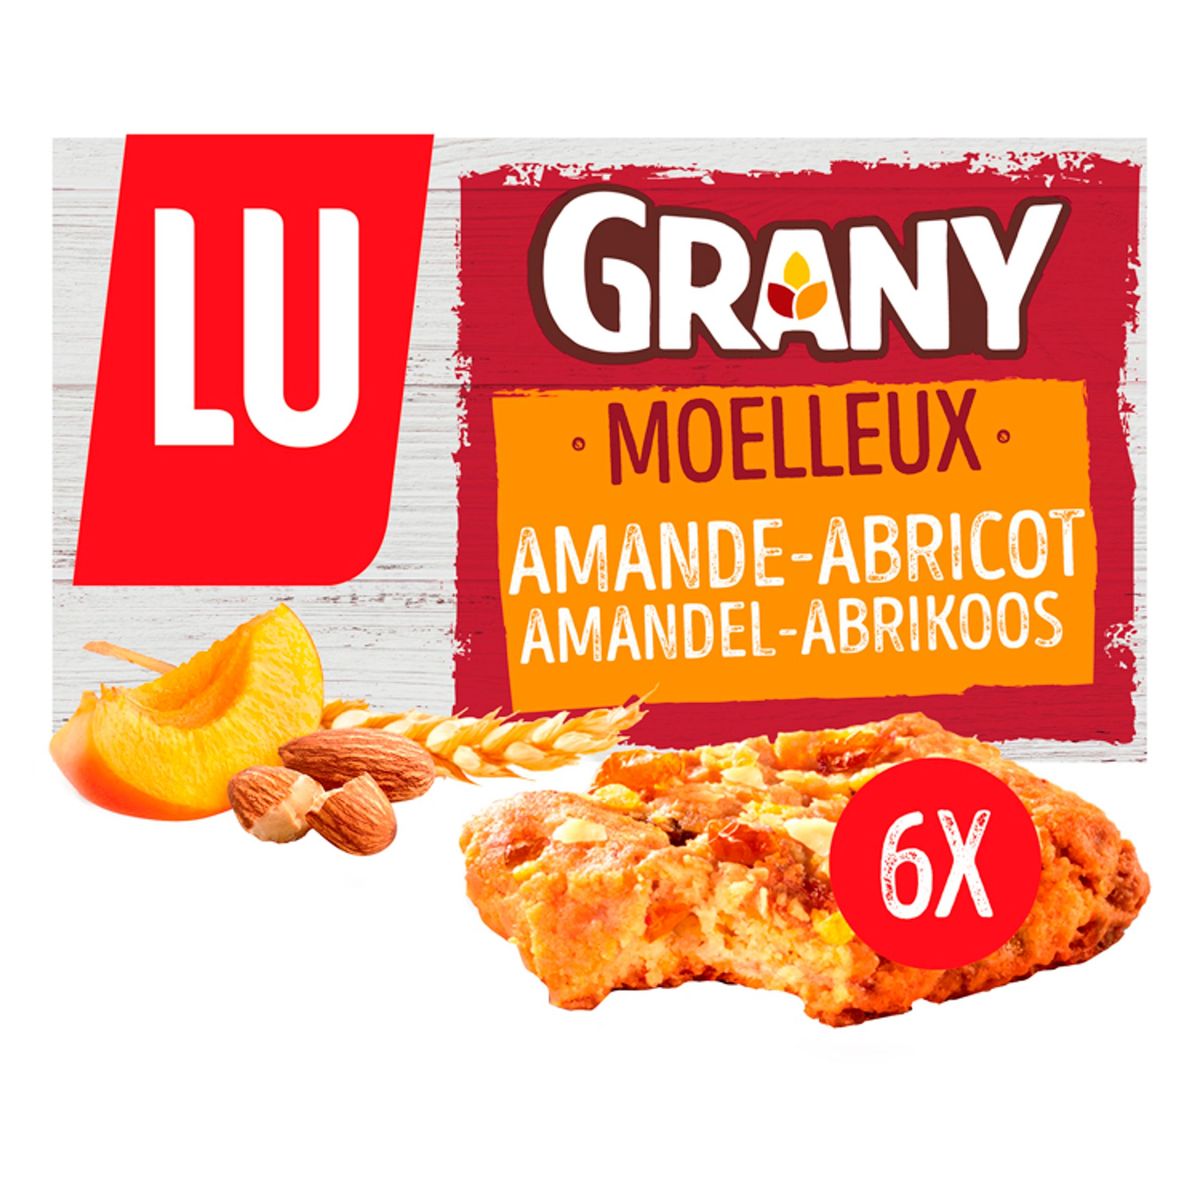 LU Grany Biscuits Moelleux Amande-Abricot 195 g